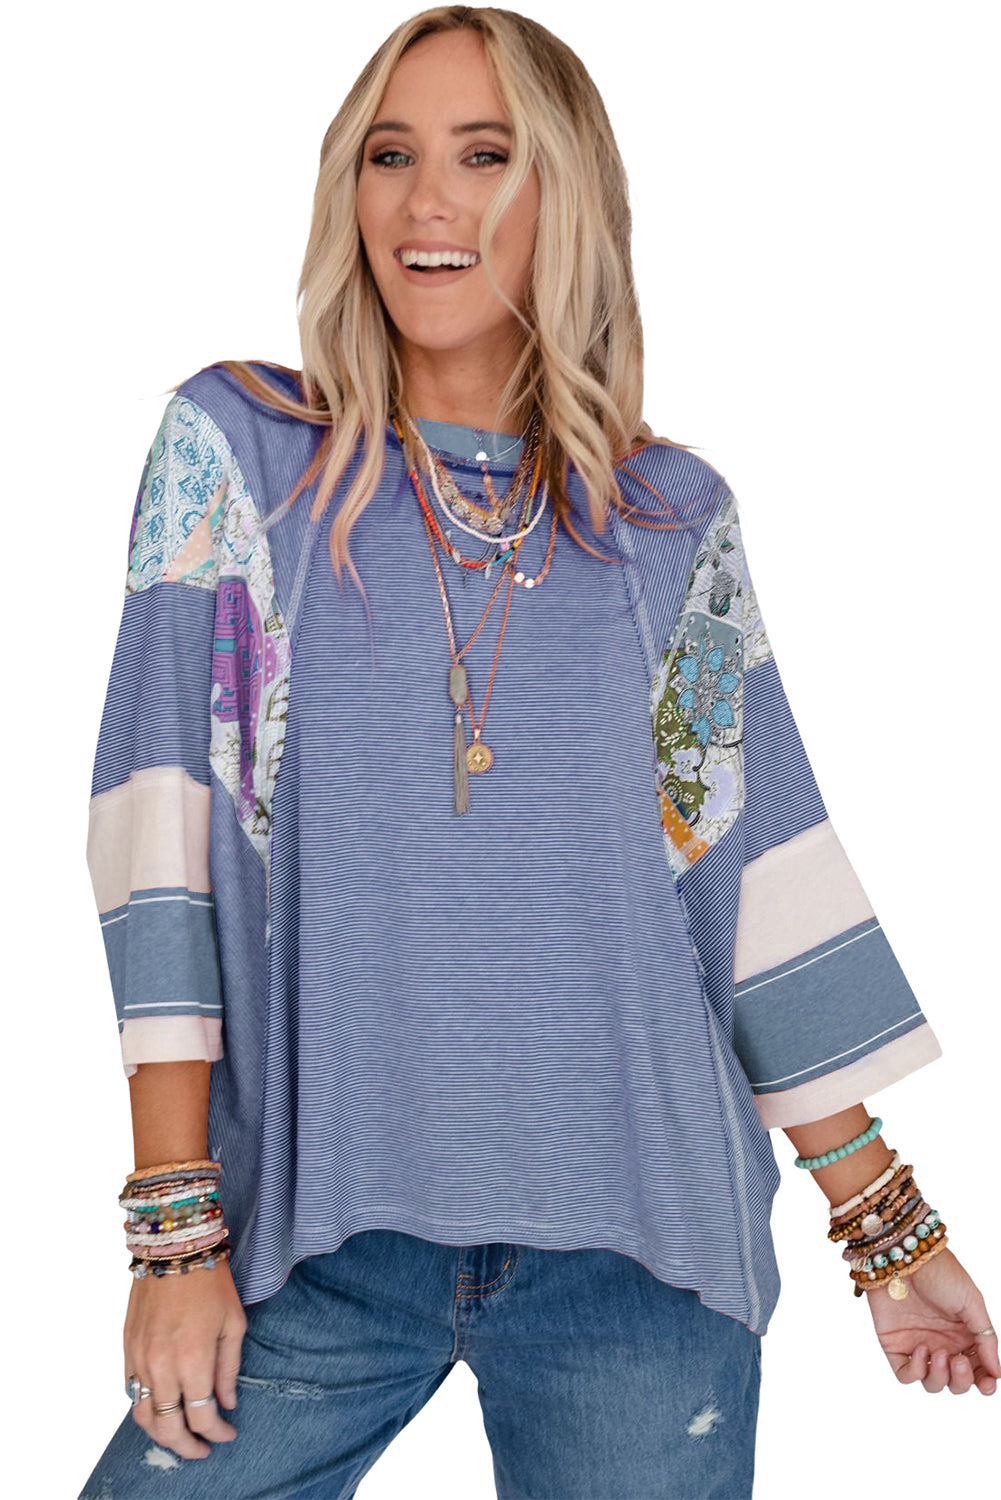 Sky Blue Printed Pinstriped Color Block Patchwork Oversized Top